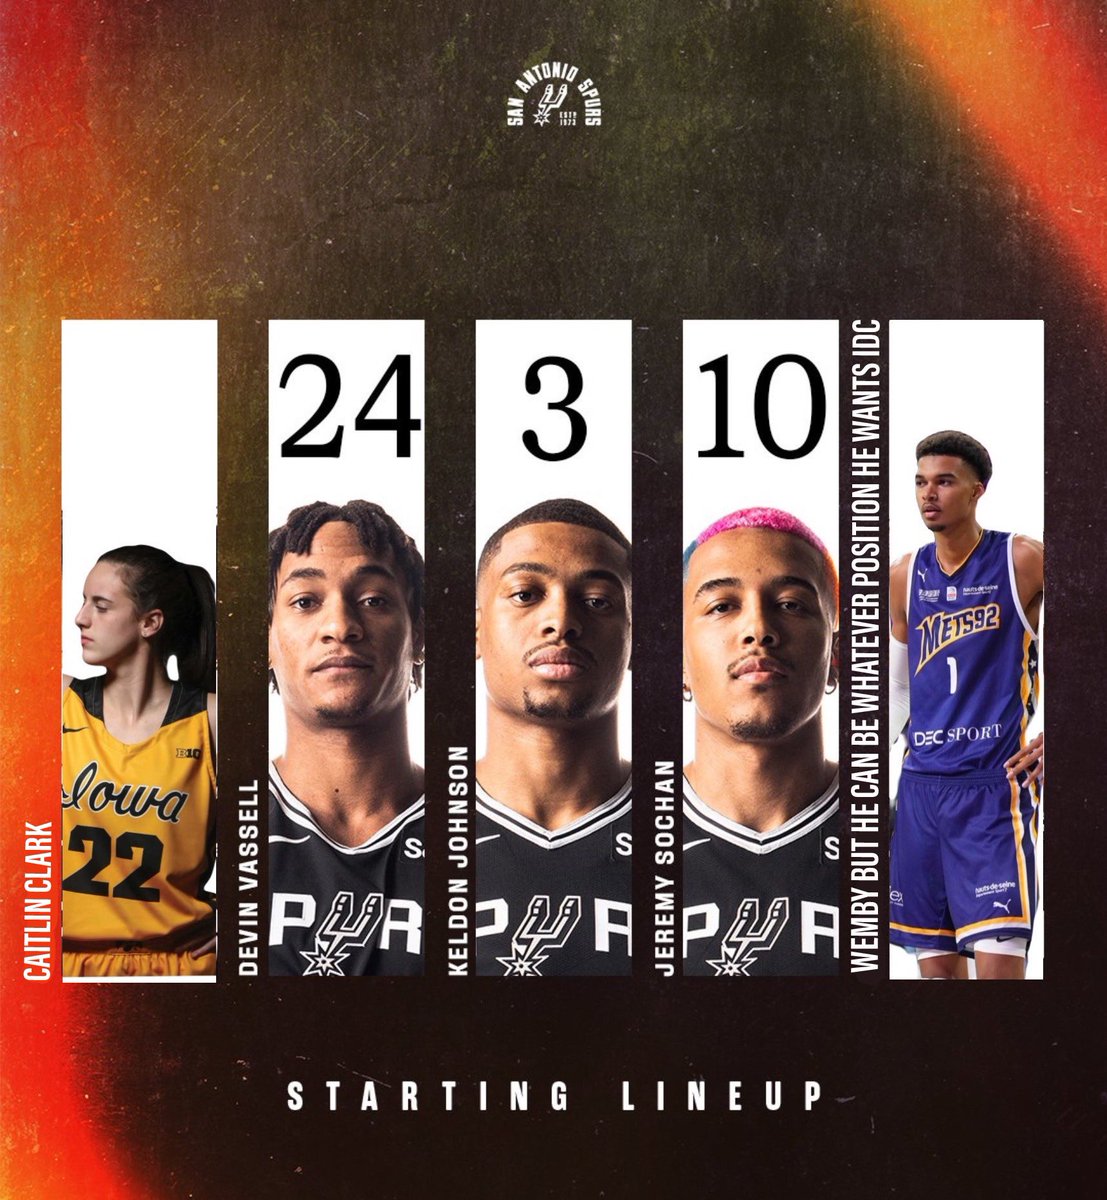 dylan on Twitter "Just got the projected 202425 starting lineup"